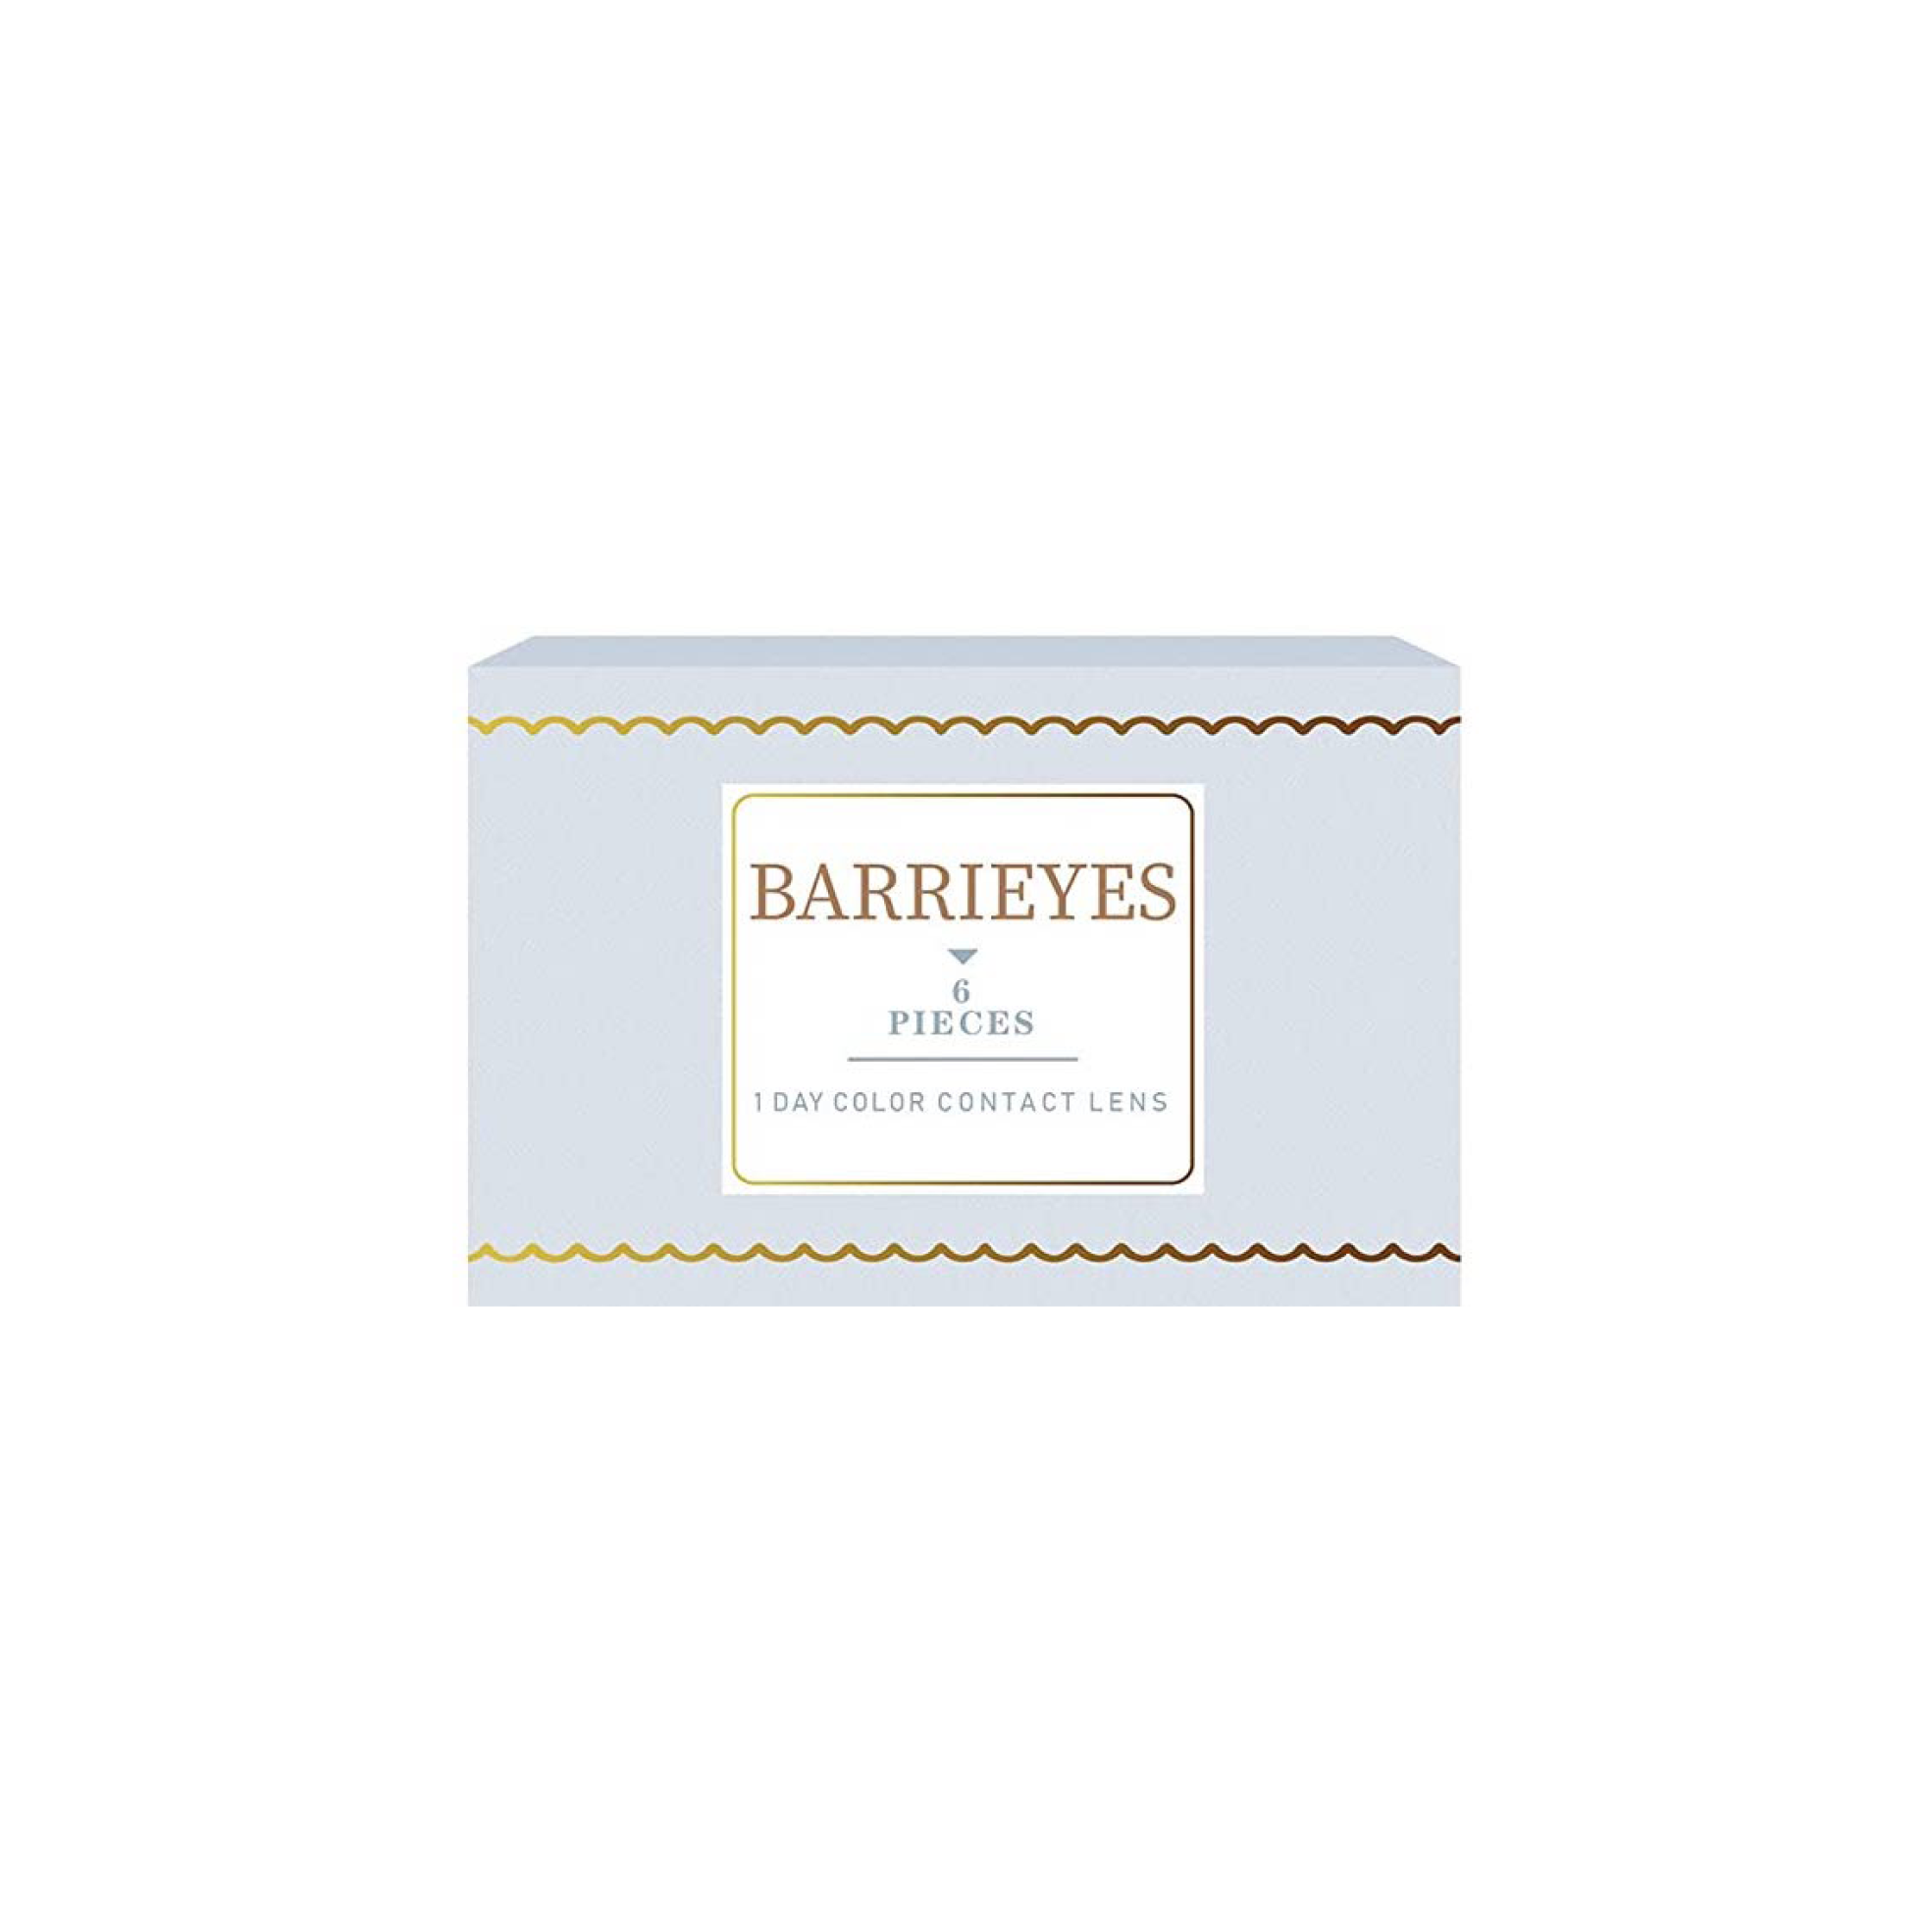 Barrieyes 1-Day color contact lens #Dawn brown日抛美瞳黎明棕｜6 Pcs